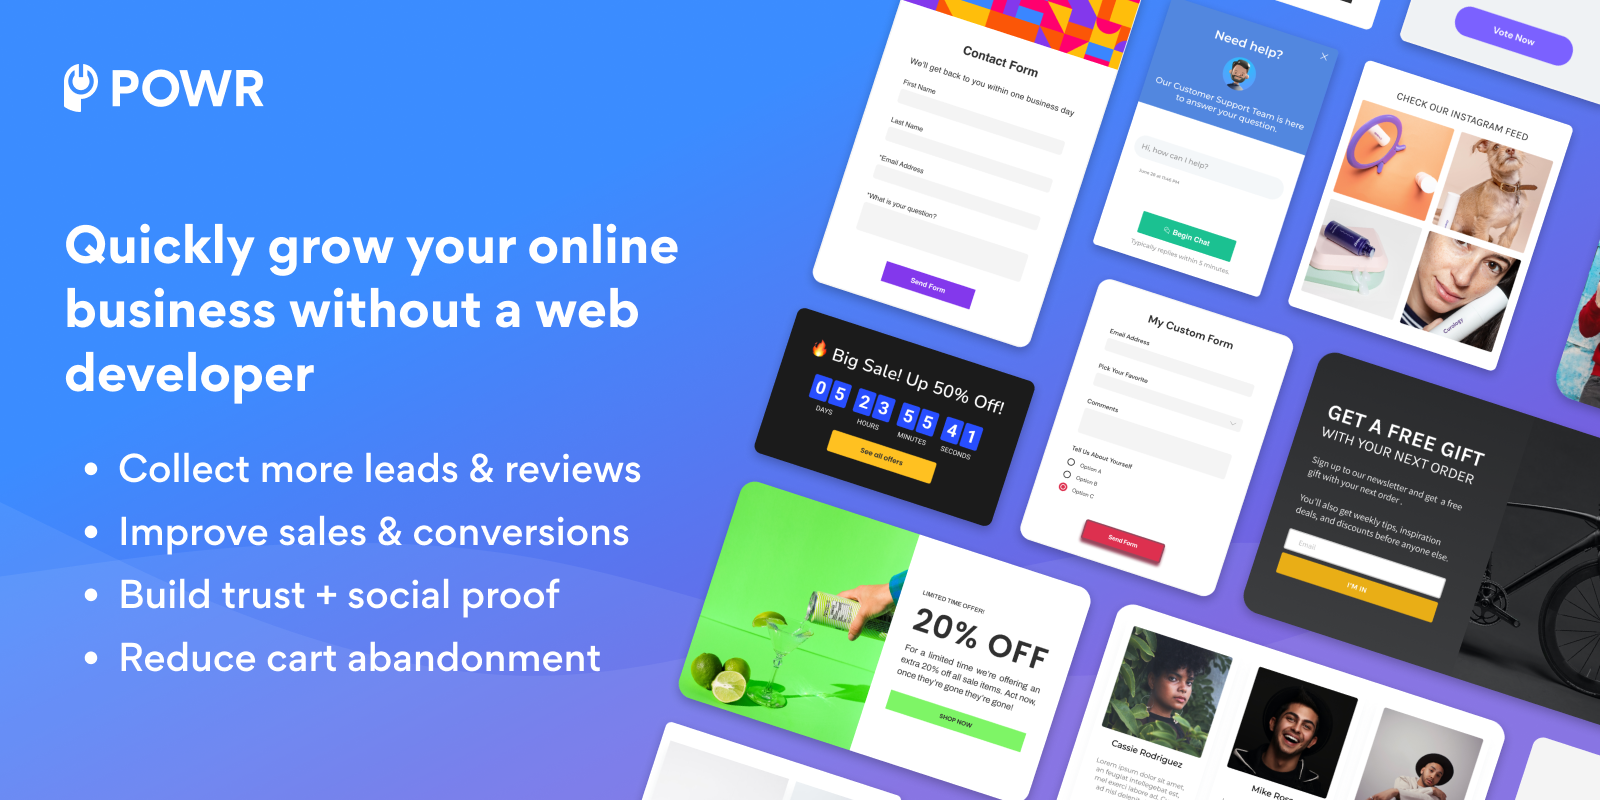 60+ POWRful website plugins designed to boost your online presence, collect more leads and conversions, and build trust + social proof with your existing customers. Begin with any app for free. No coding or credit card is required.